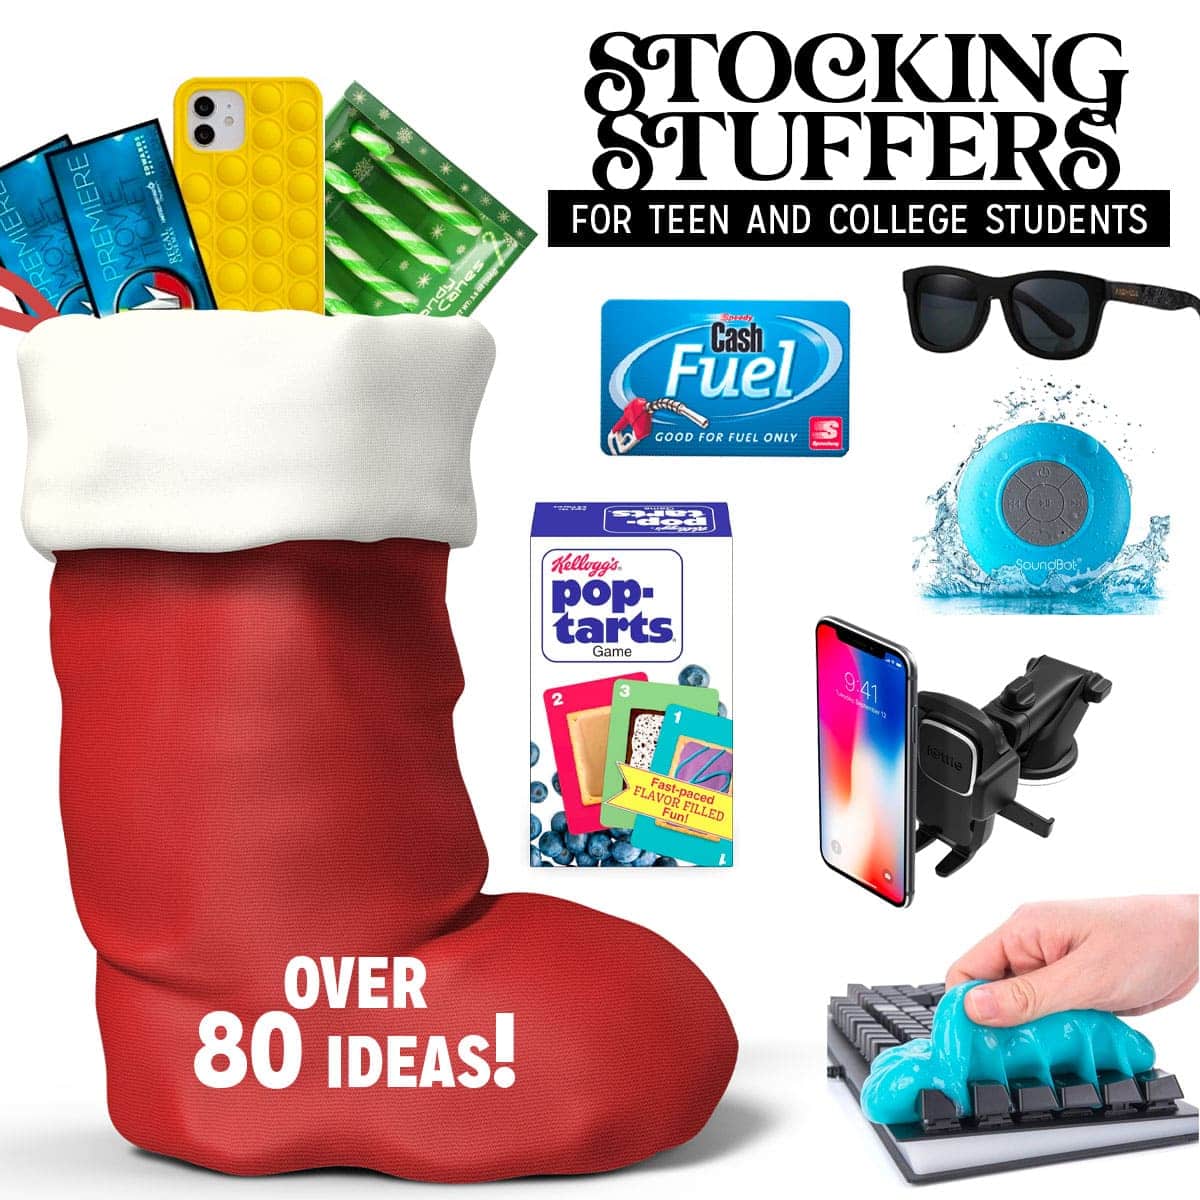 The Best Stocking Stuffers For College Students